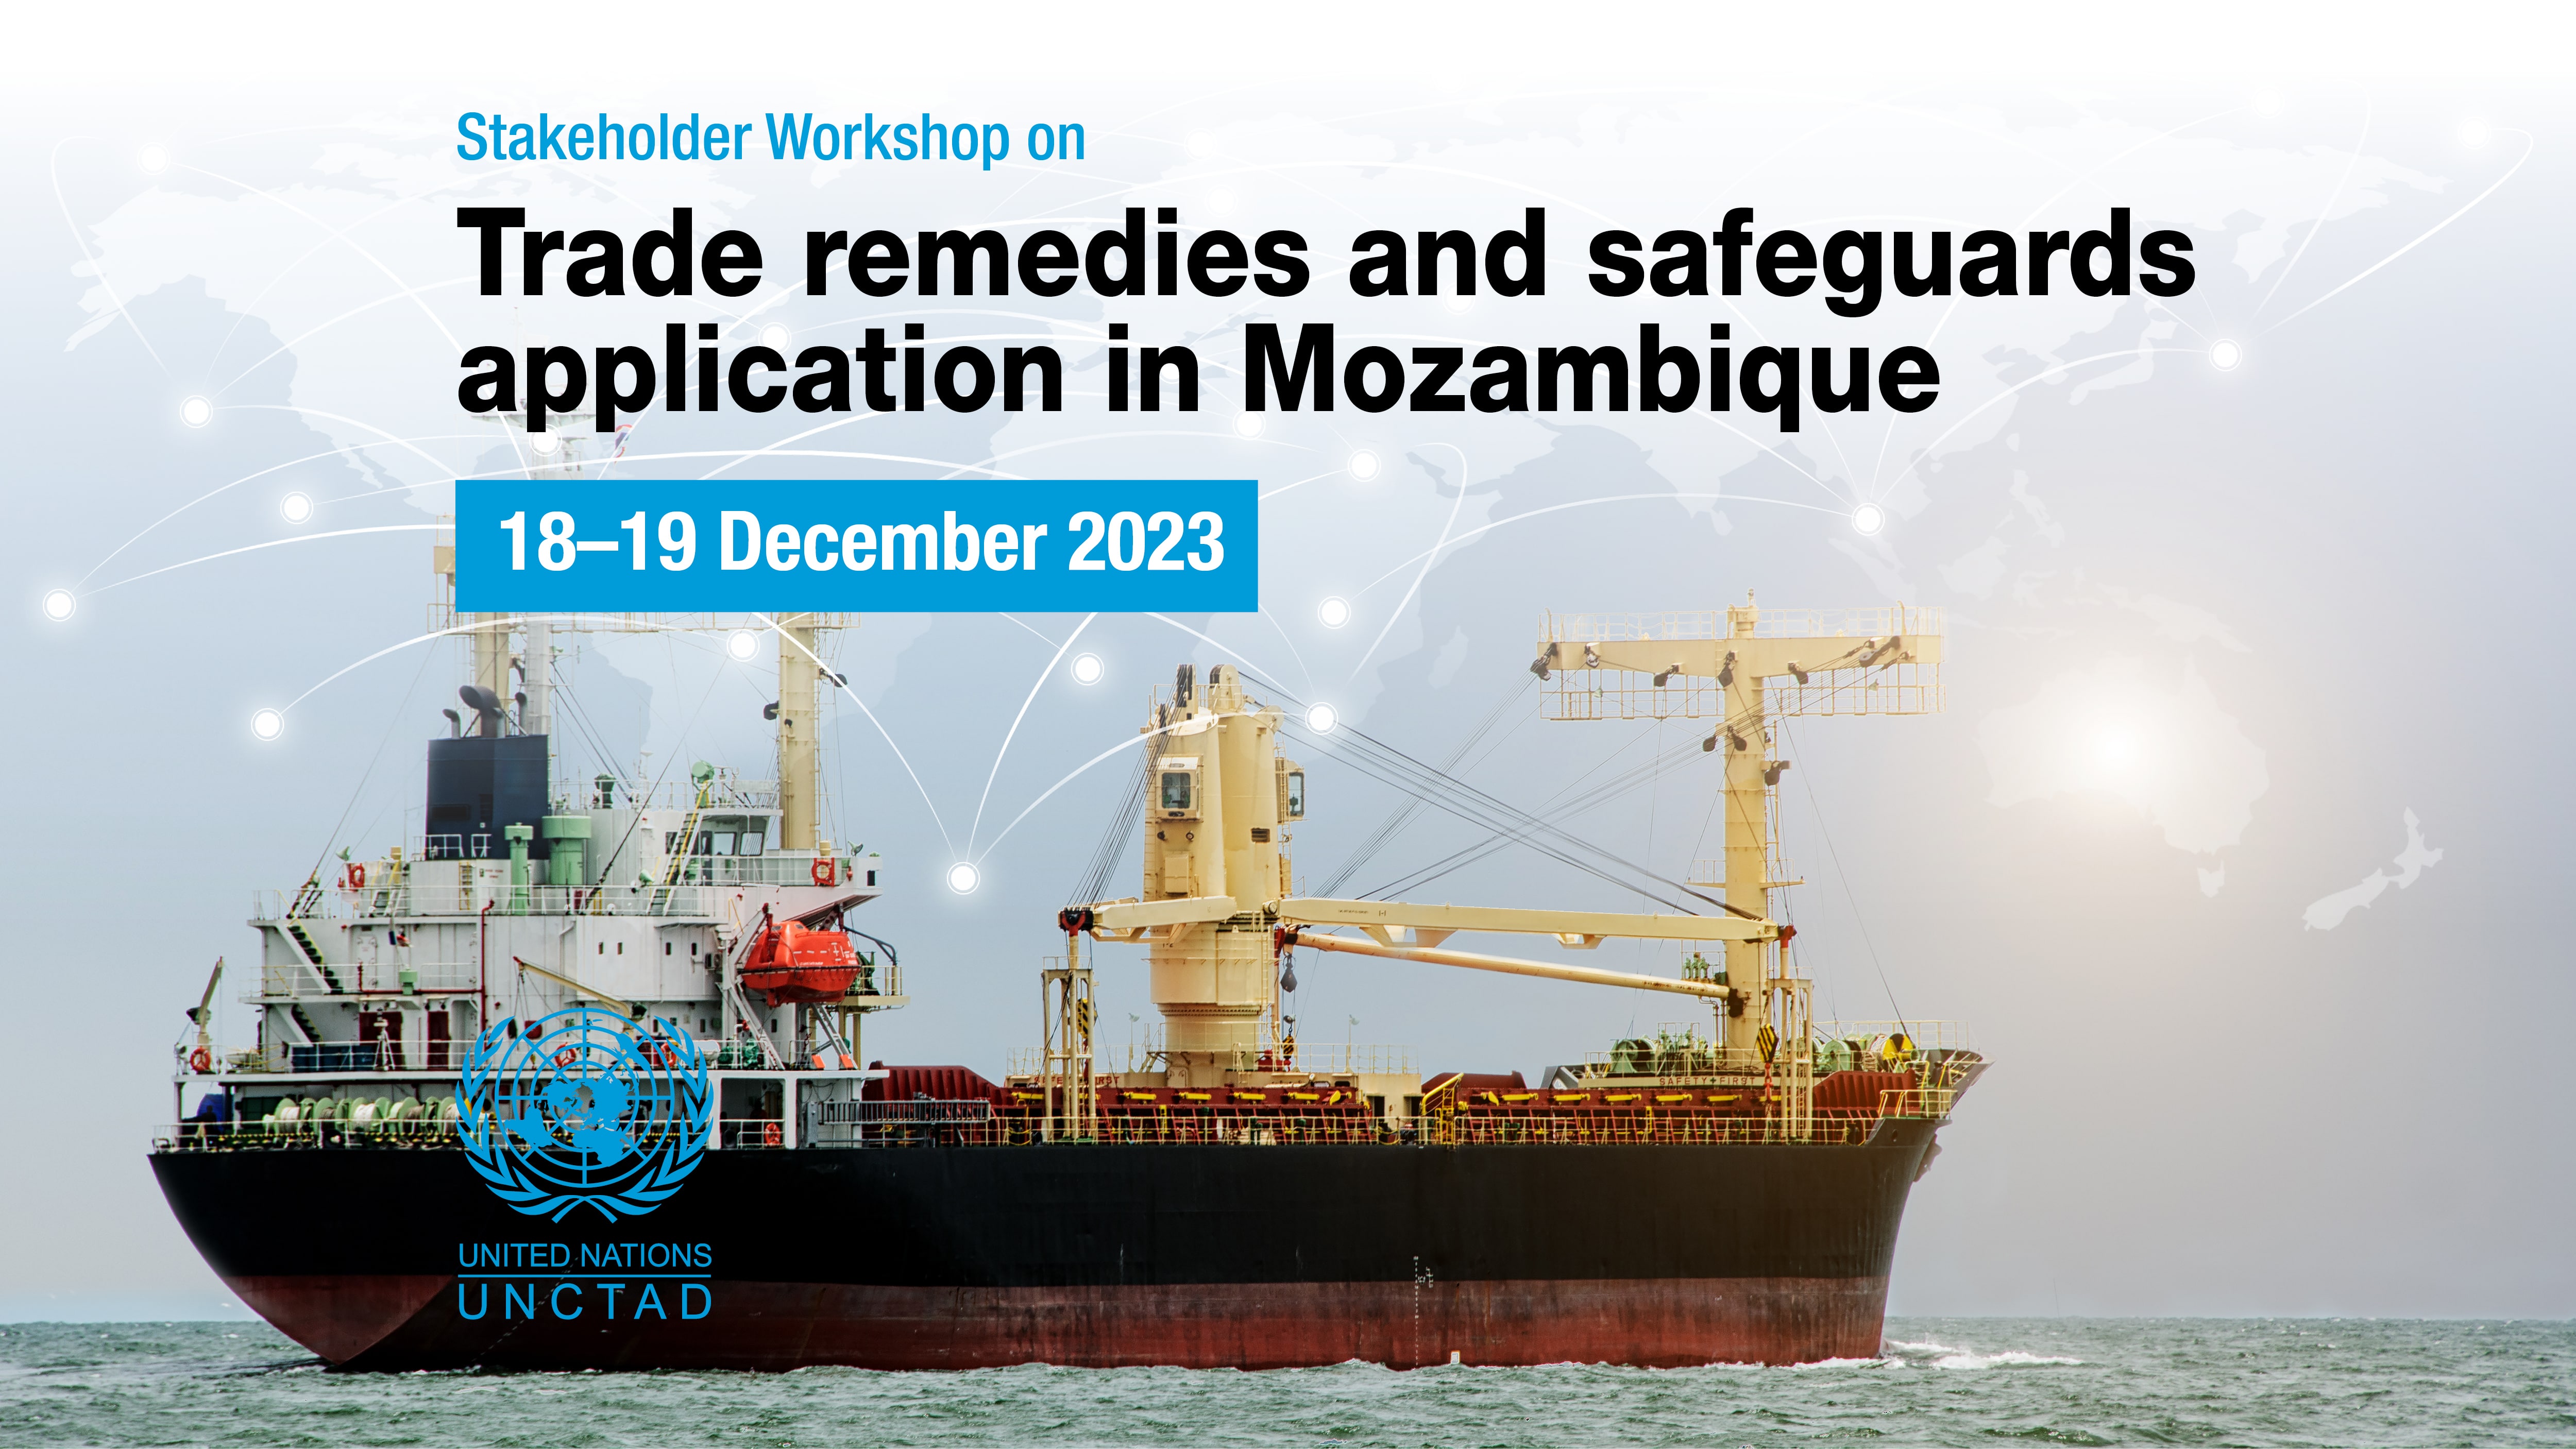 Stakeholder workshop on trade remedies and safeguards application in Mozambique